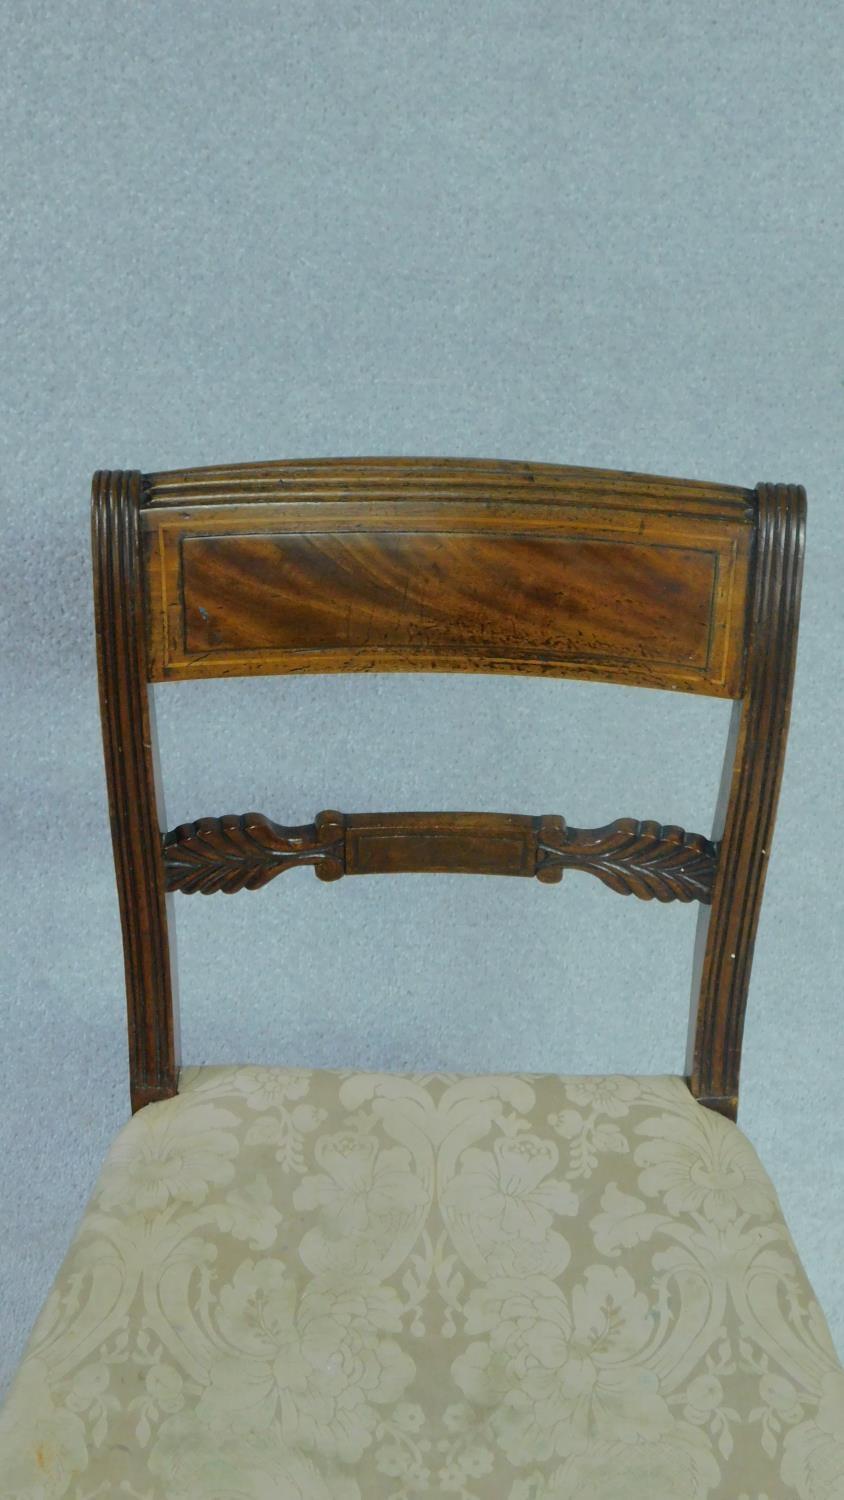 A set of five late Georgian mahogany and satinwood inlaid dining chairs in damask stuffover seats on - Image 5 of 5